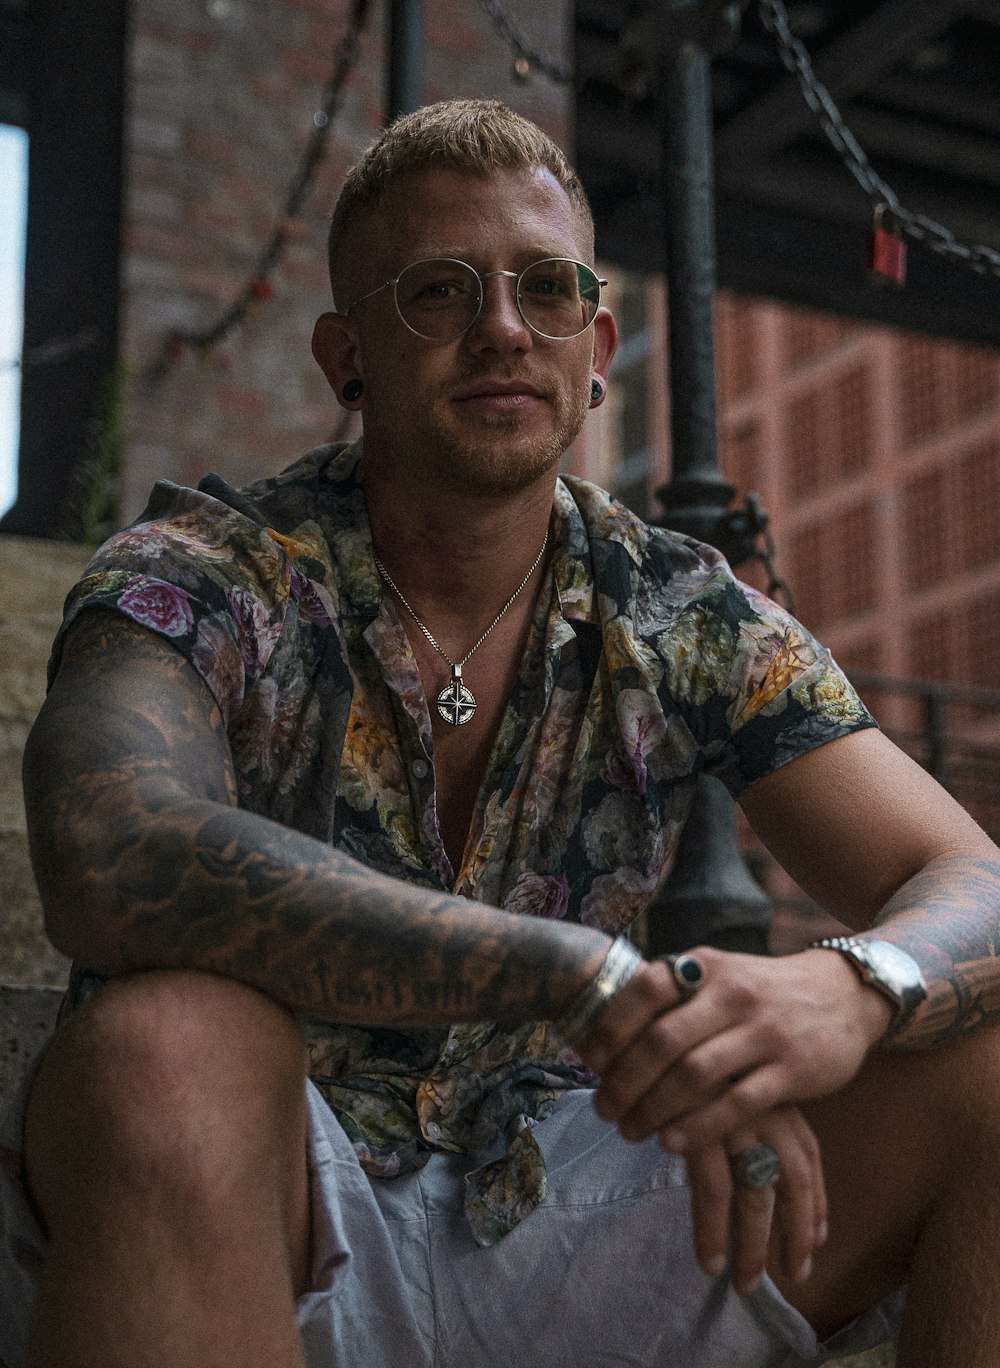 a man with tattoos and a necklace